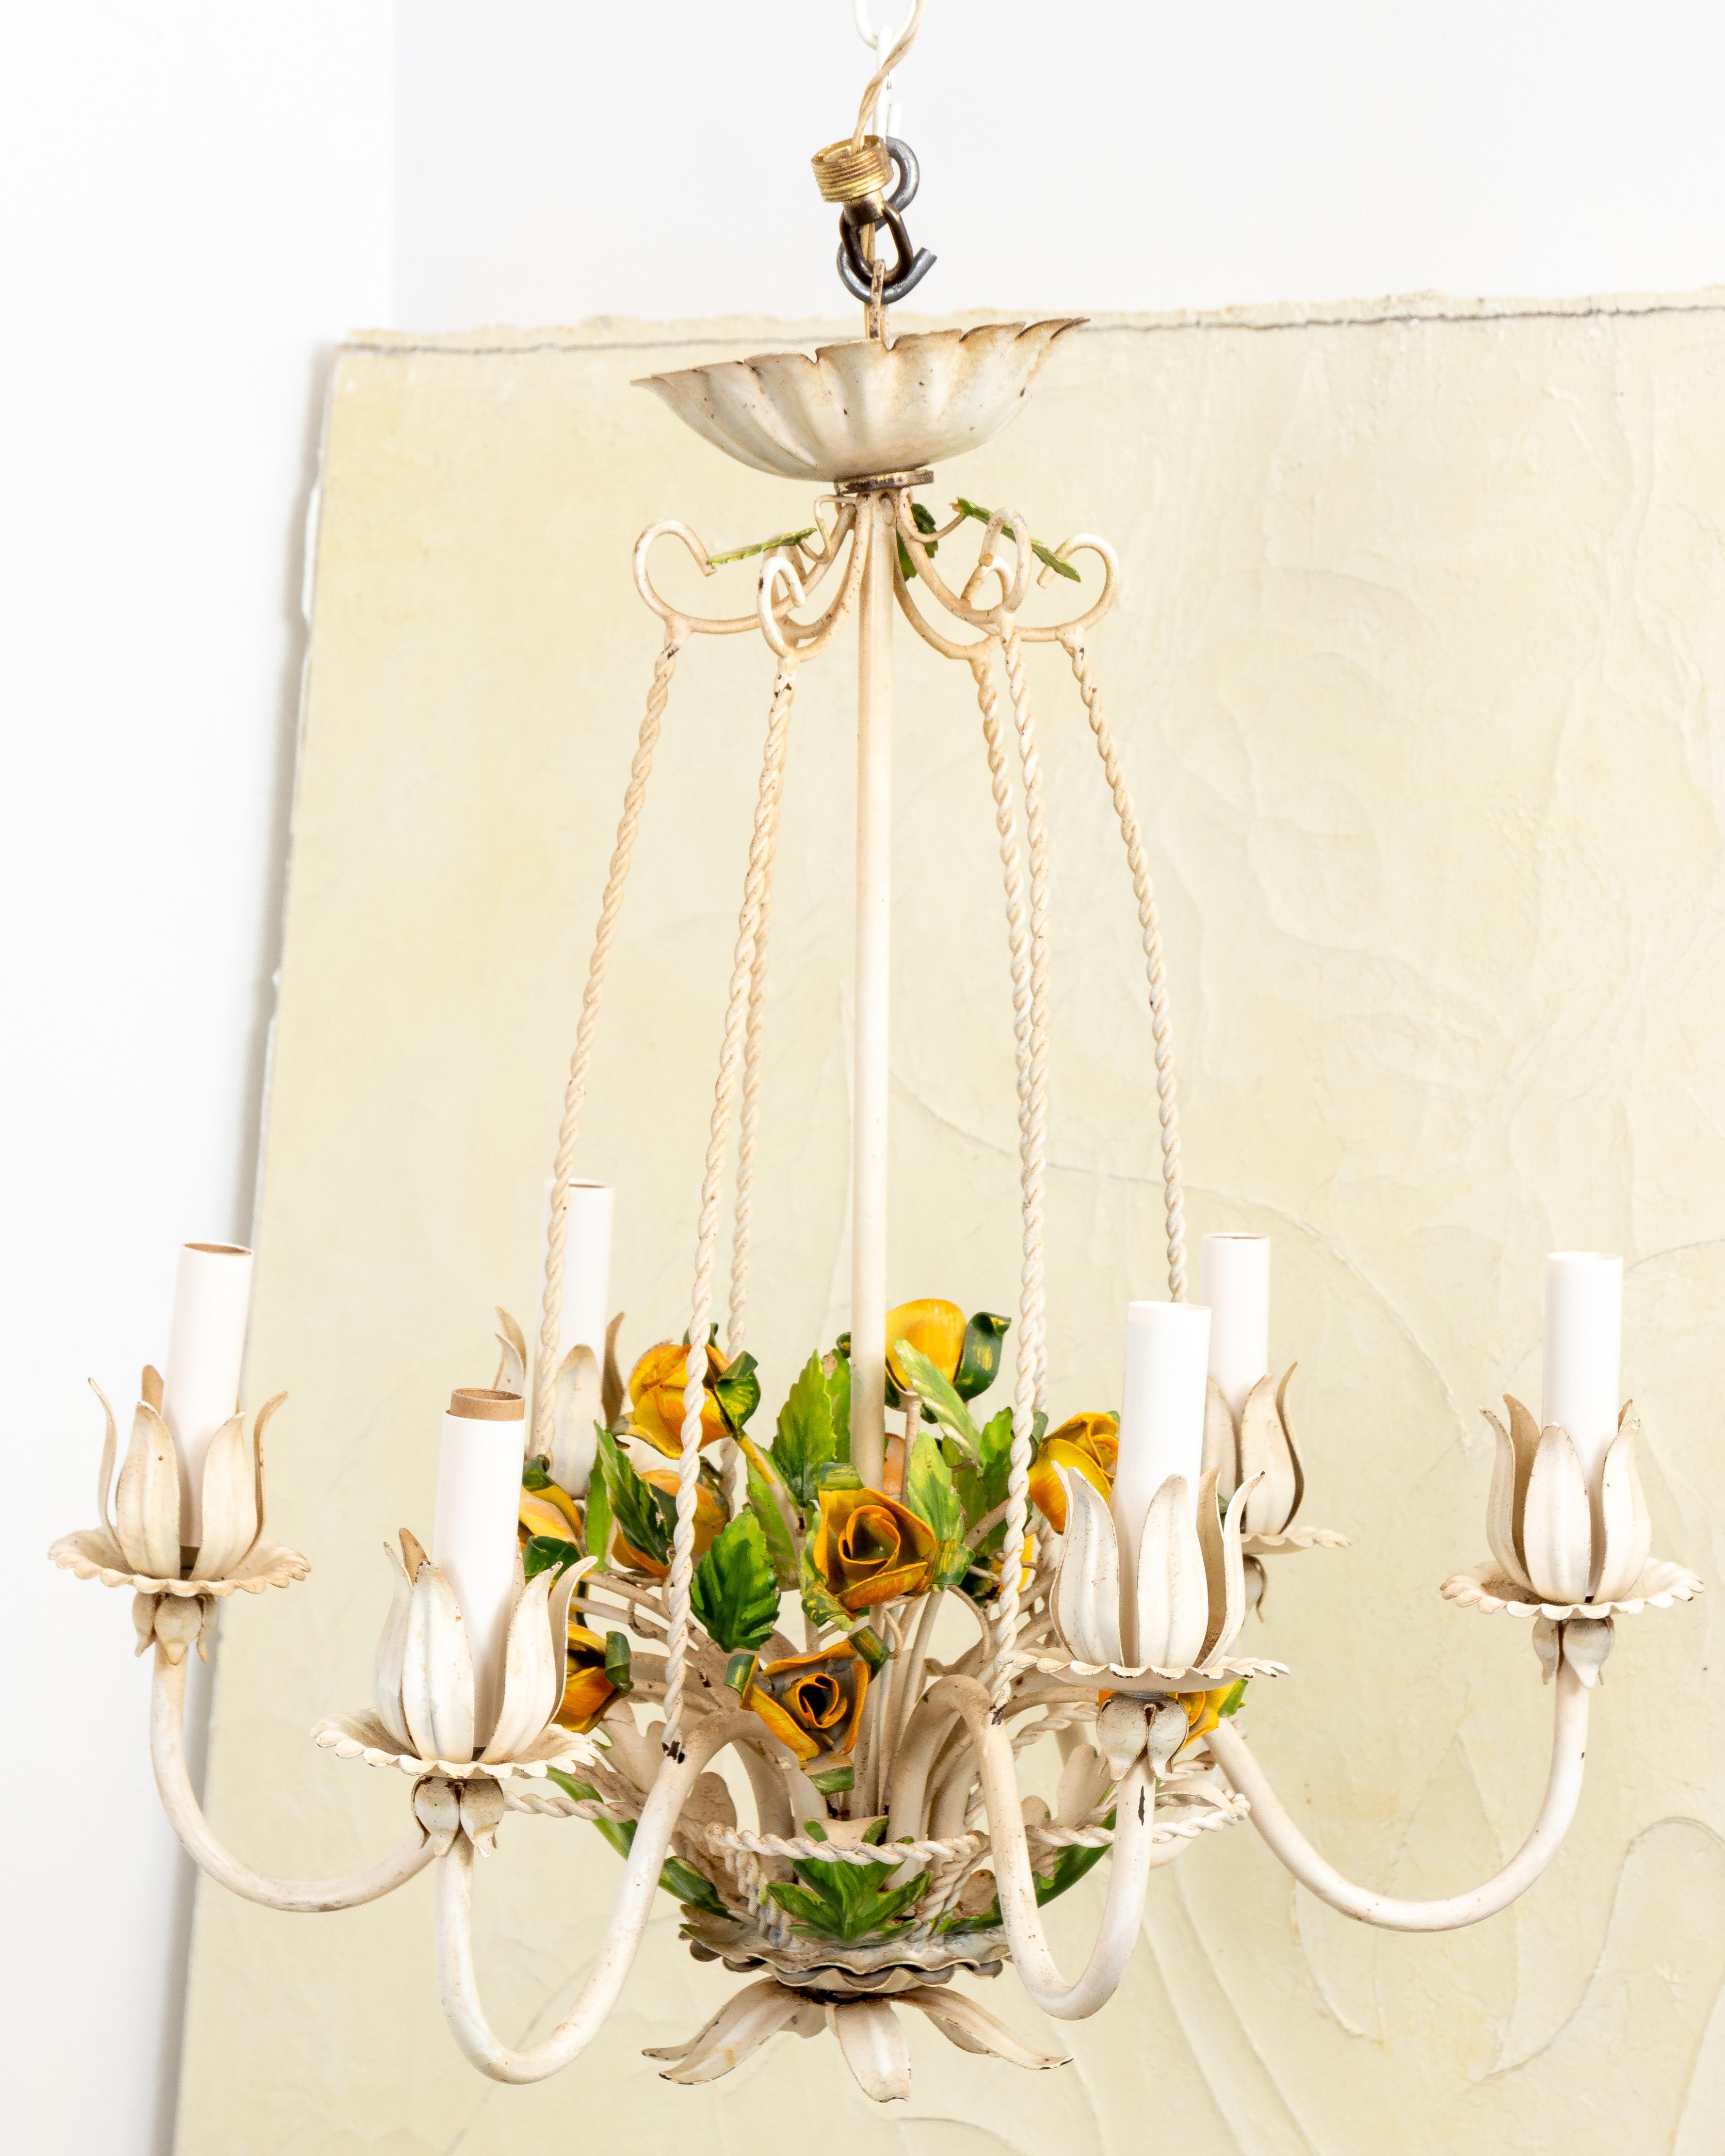 Hollywood Regency tole floral chandelier with roses. Original ceiling CAP. Made in Italy.